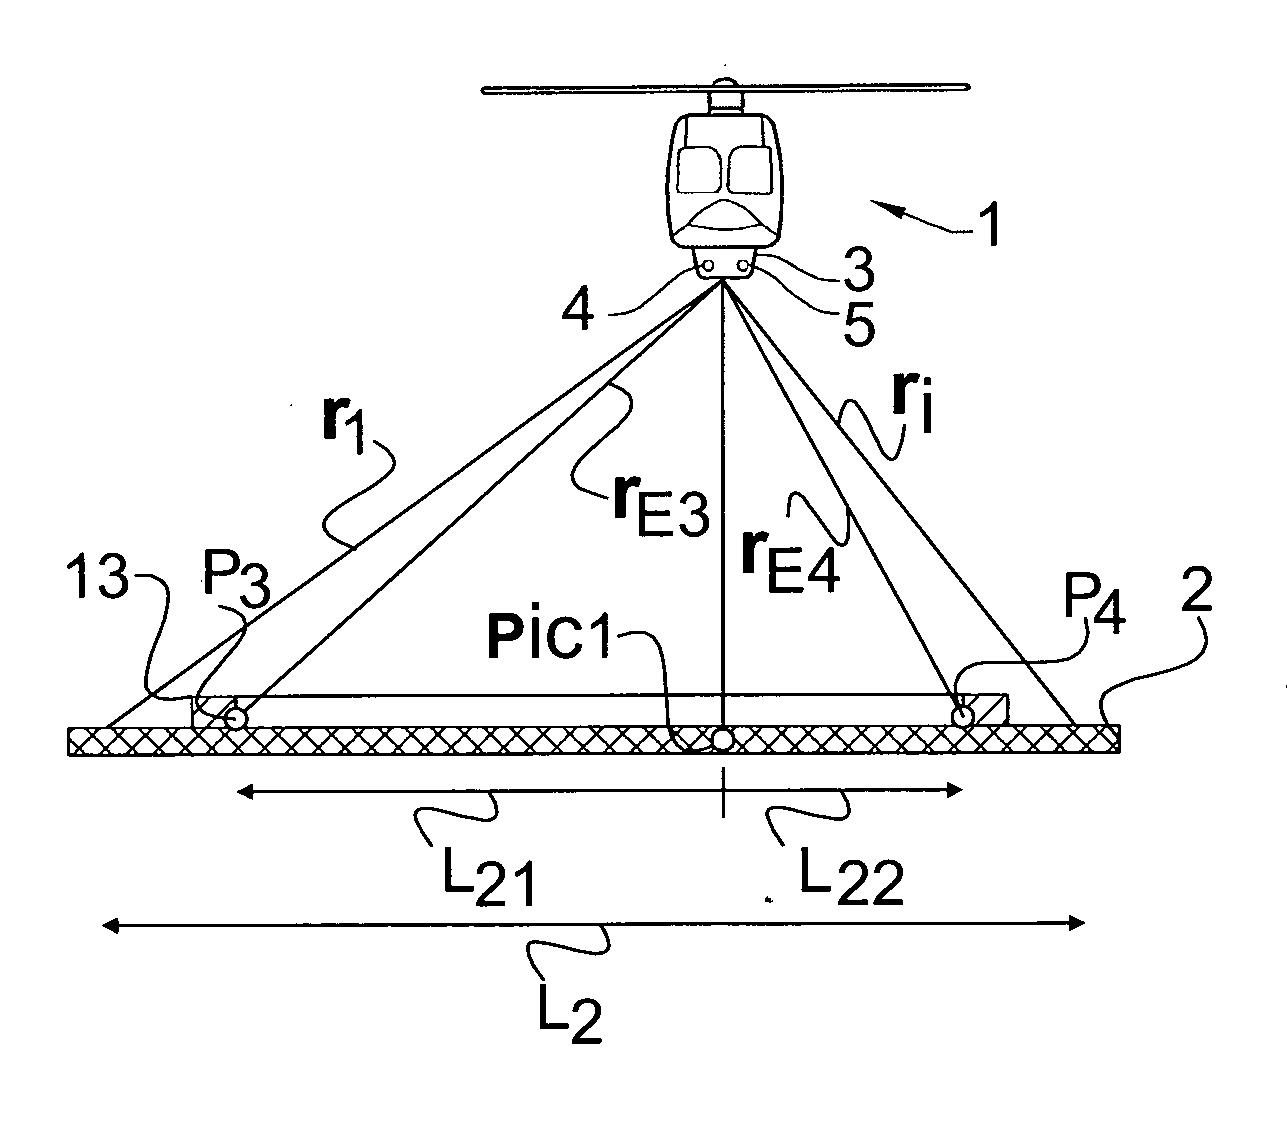 Centering above a predetermined area of a landing platform